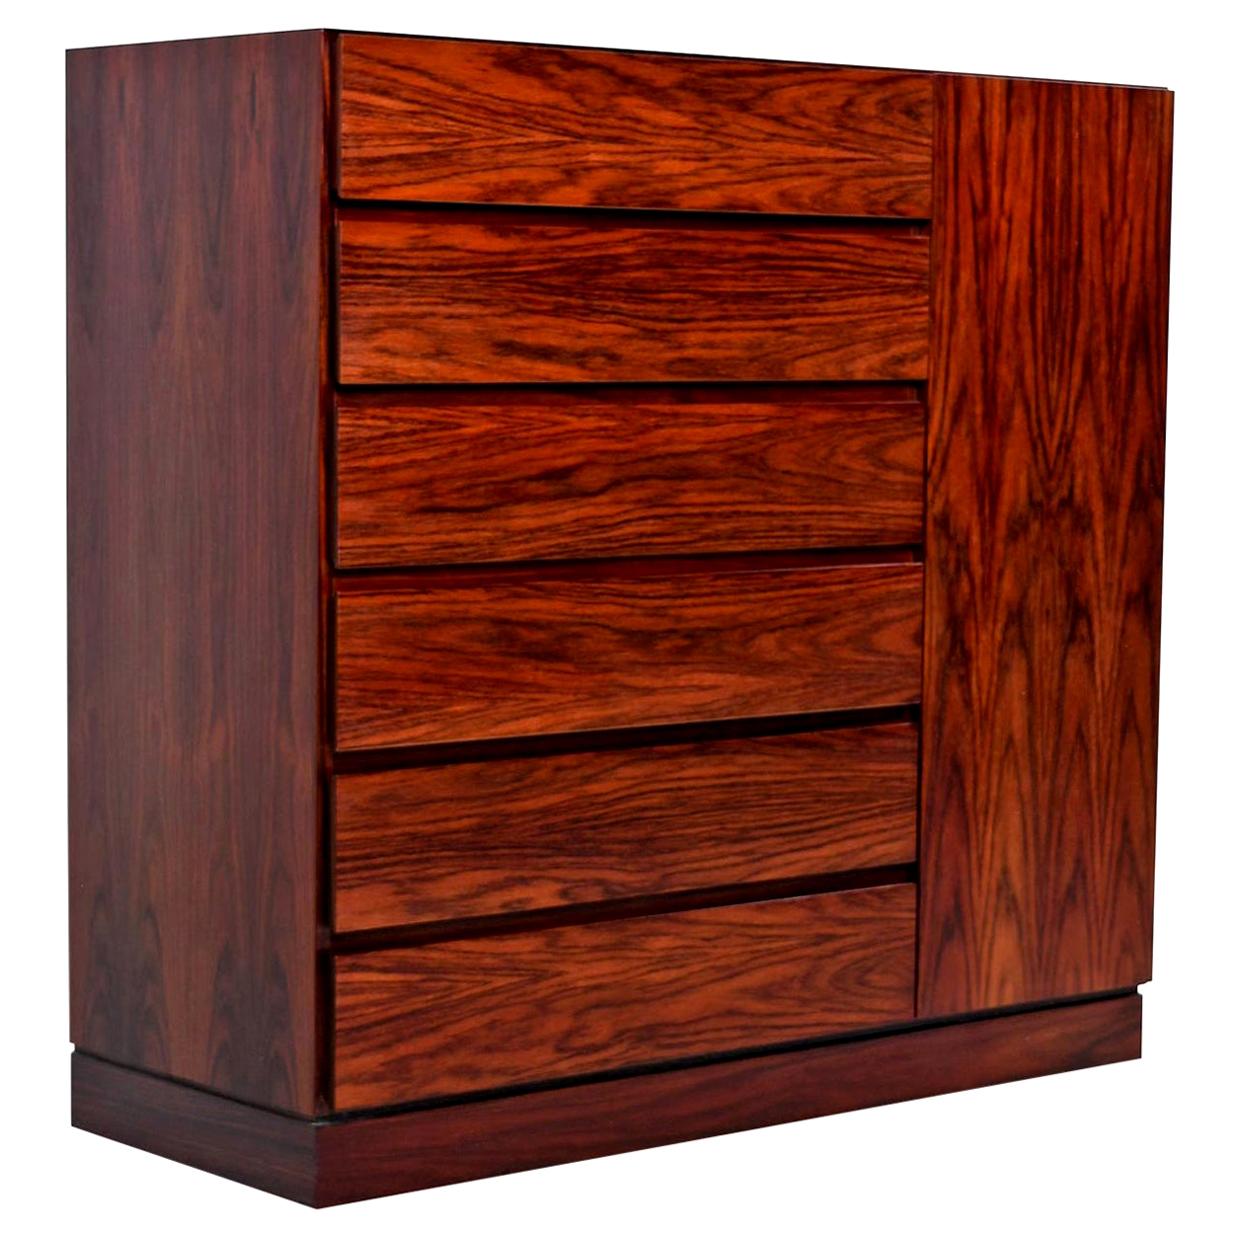 Scandinavian inspired minimalism at its best. The rosewood veneers are rich and dark with flaring cathedral grain. High end Scandinavian cabinet shop construction inside and out with dovetail joinery on the solid beechwood interior drawers. Designed